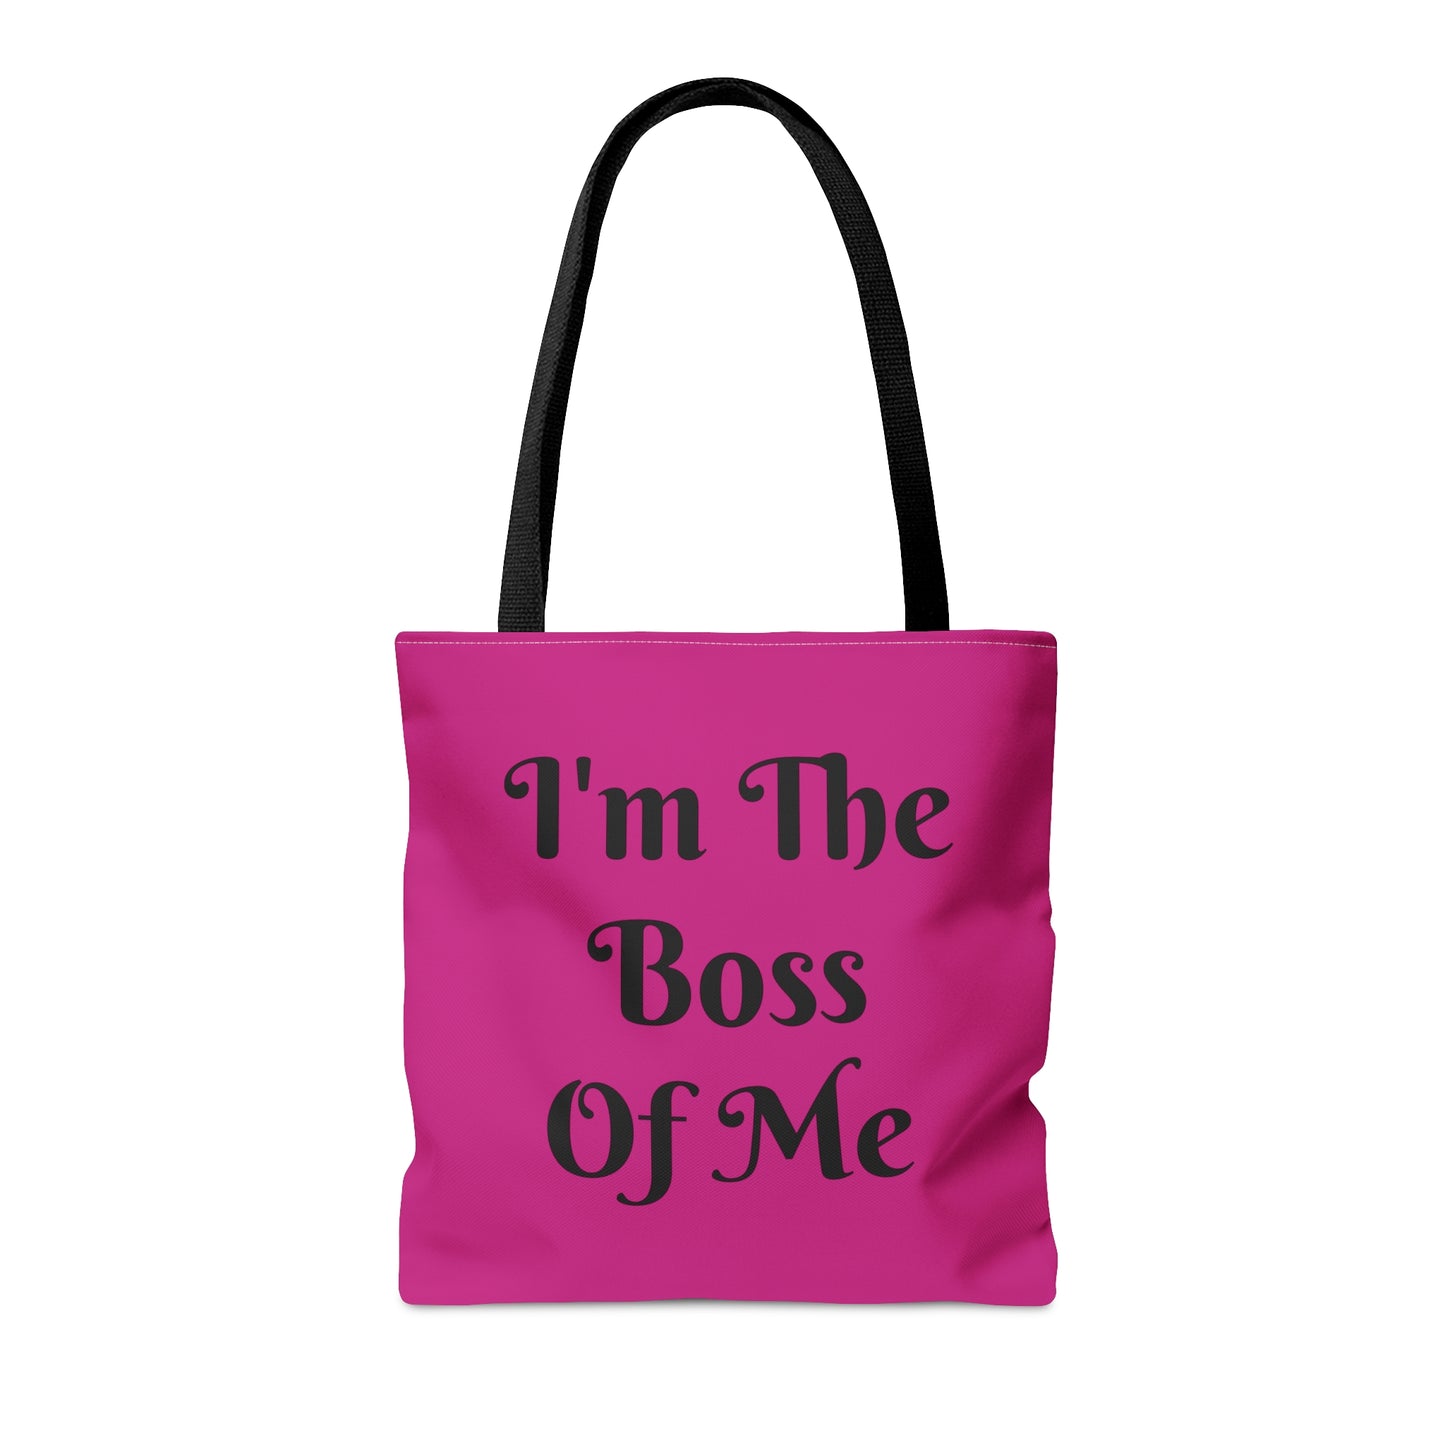 Hot Pink with Black Cotton Handles ITBOM BOSS Tote Bag